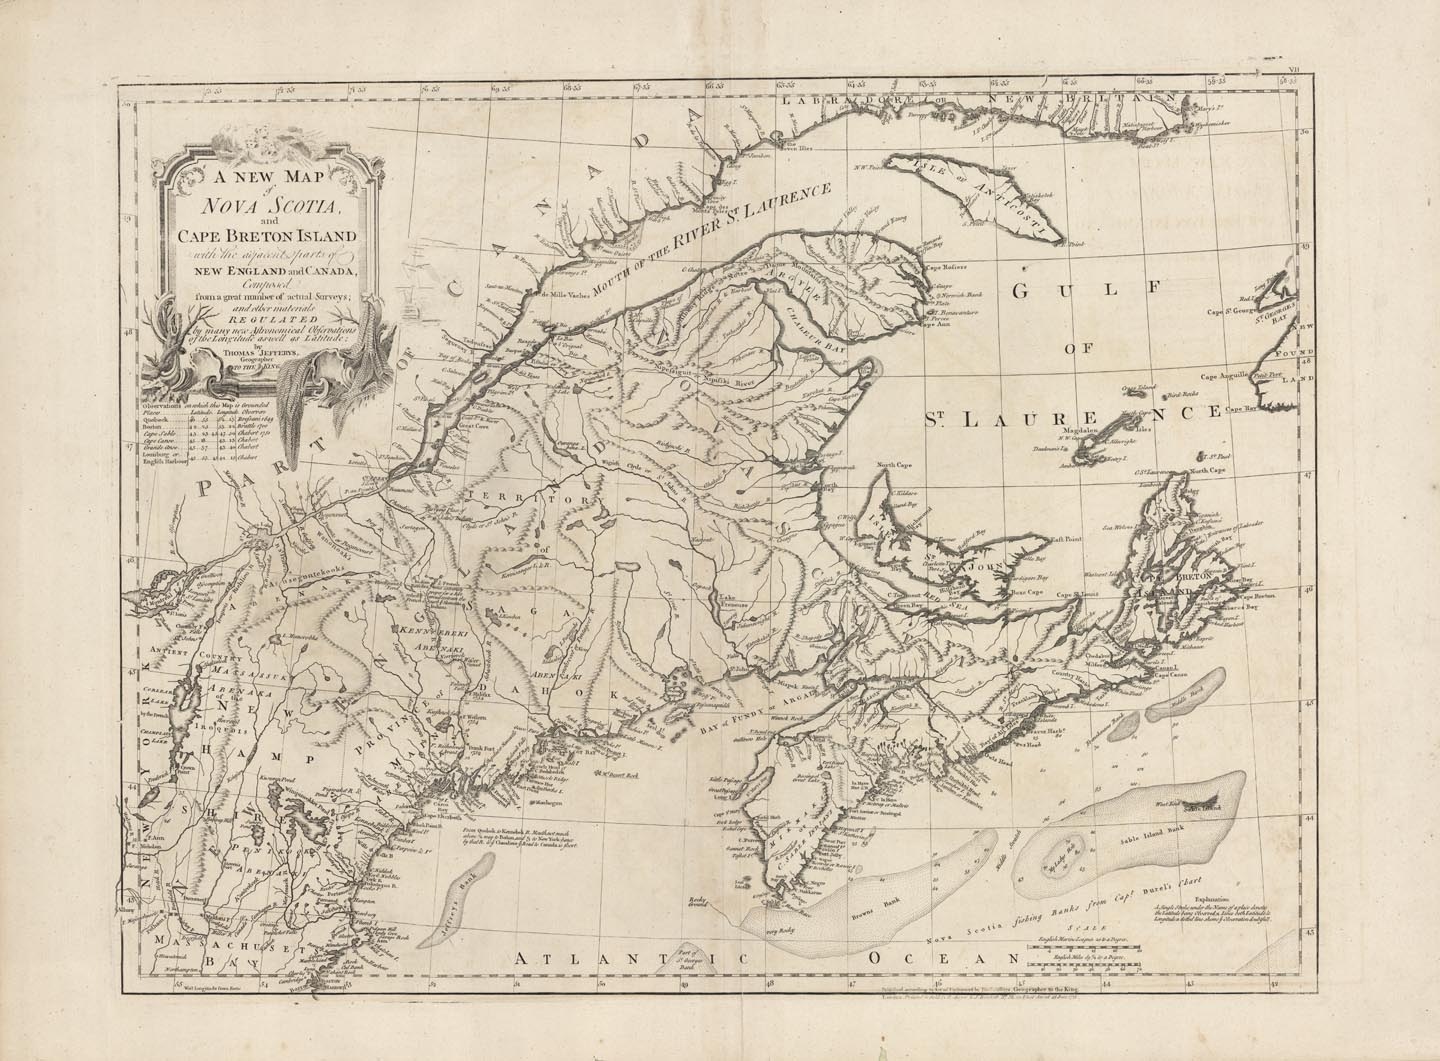 New Map of Nova Scotia, and Cape Breton Island with the adjacent parts of New England and Canada. A,